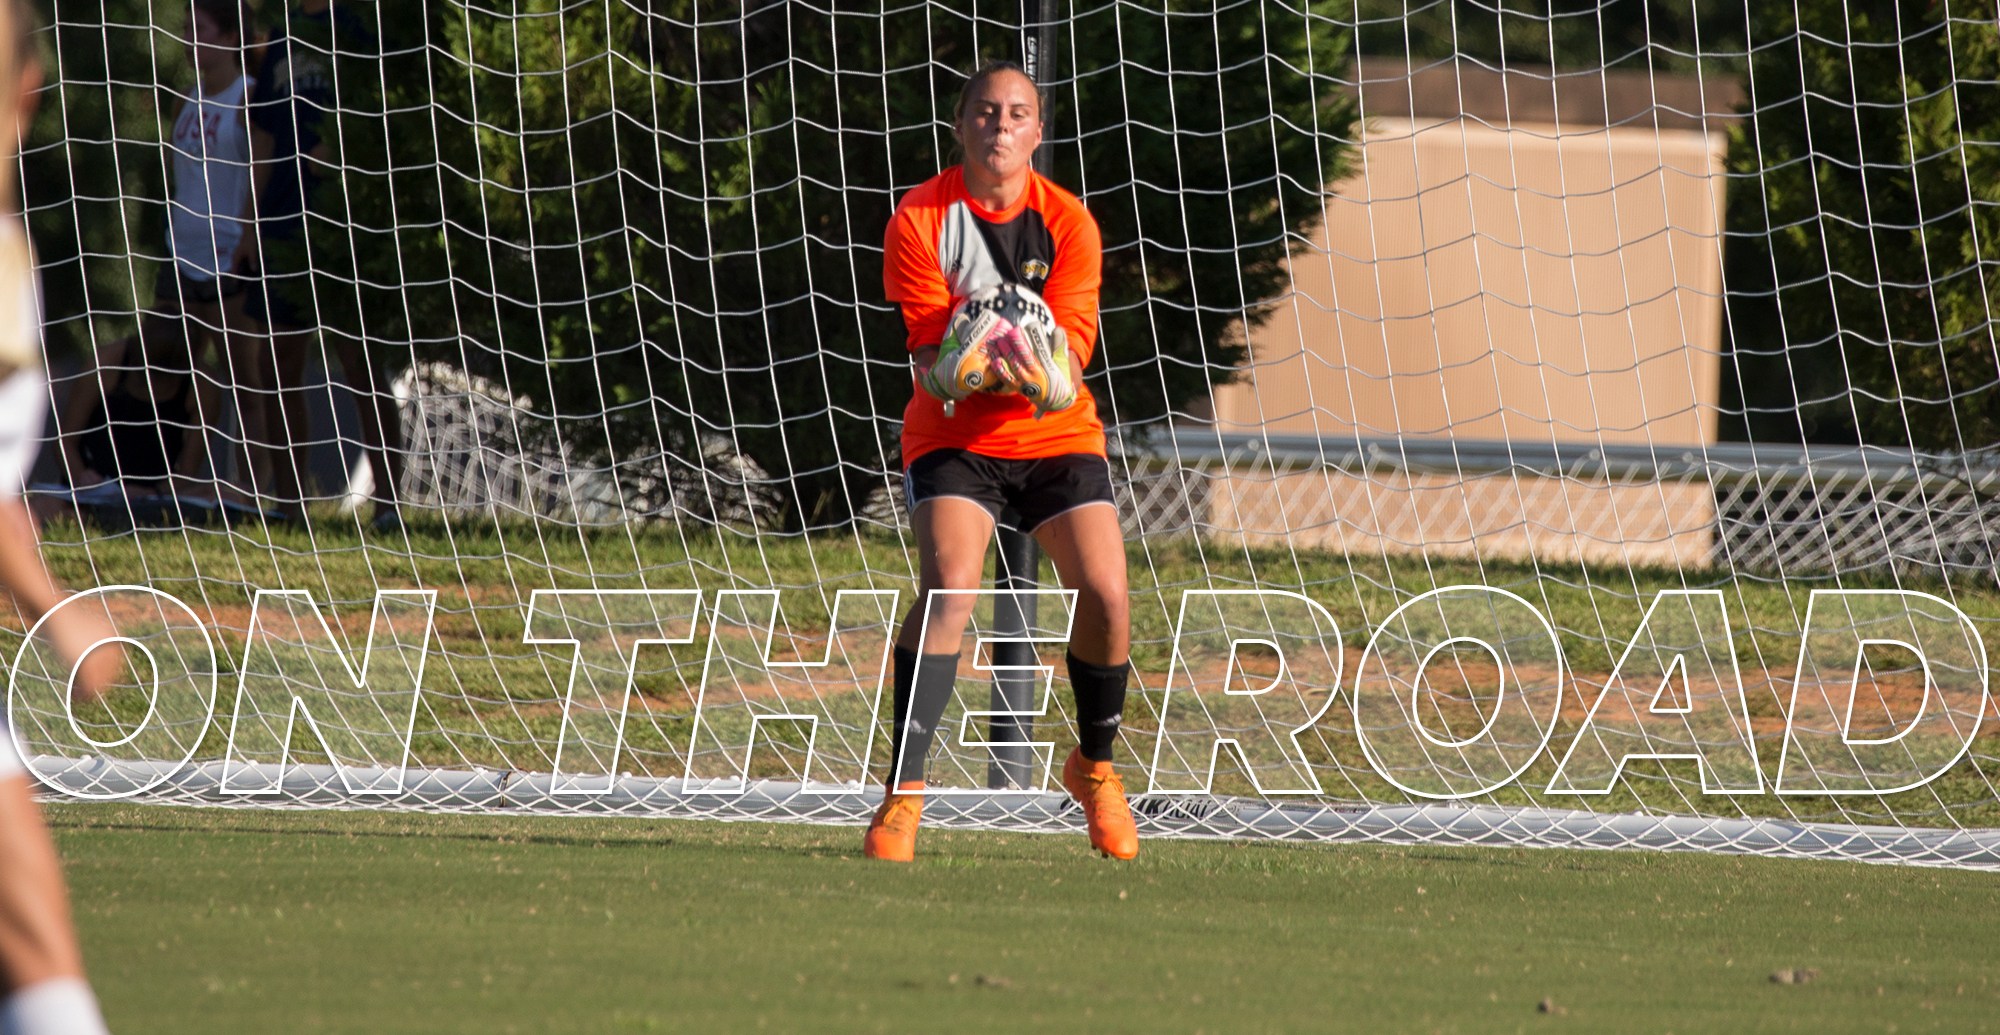 On the Road: Women's Soccer Travels to Young Harris, Ga.